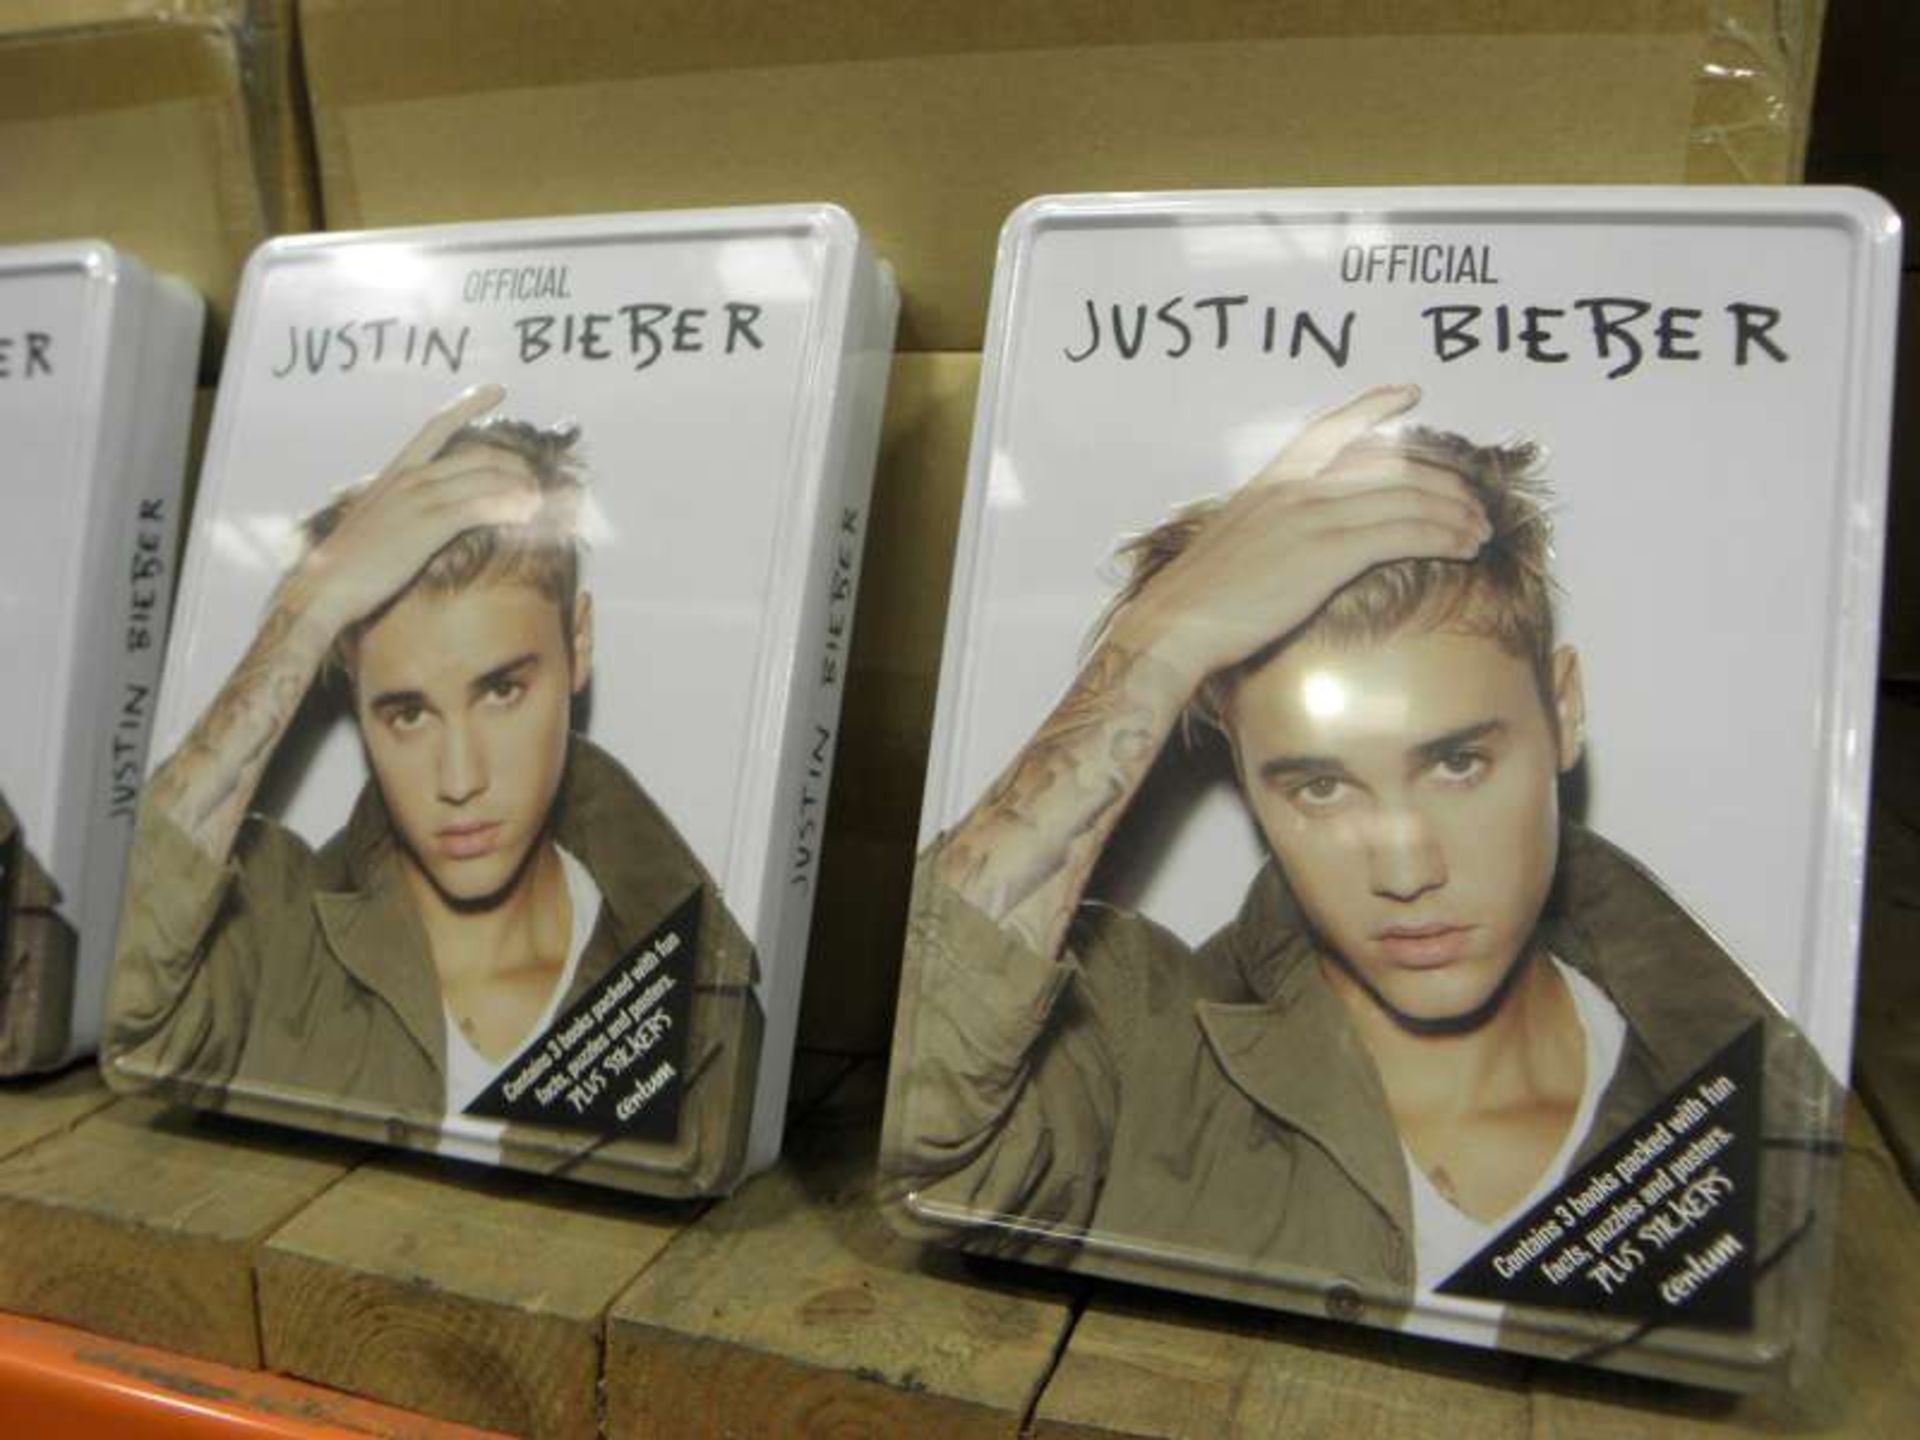 100 X JUSTIN BIEBER GIFT TINS EACH TIN CONTAINS 3 BOOKS PACKED WITH FUN FACTS PUZZLES AND POSTERS IN